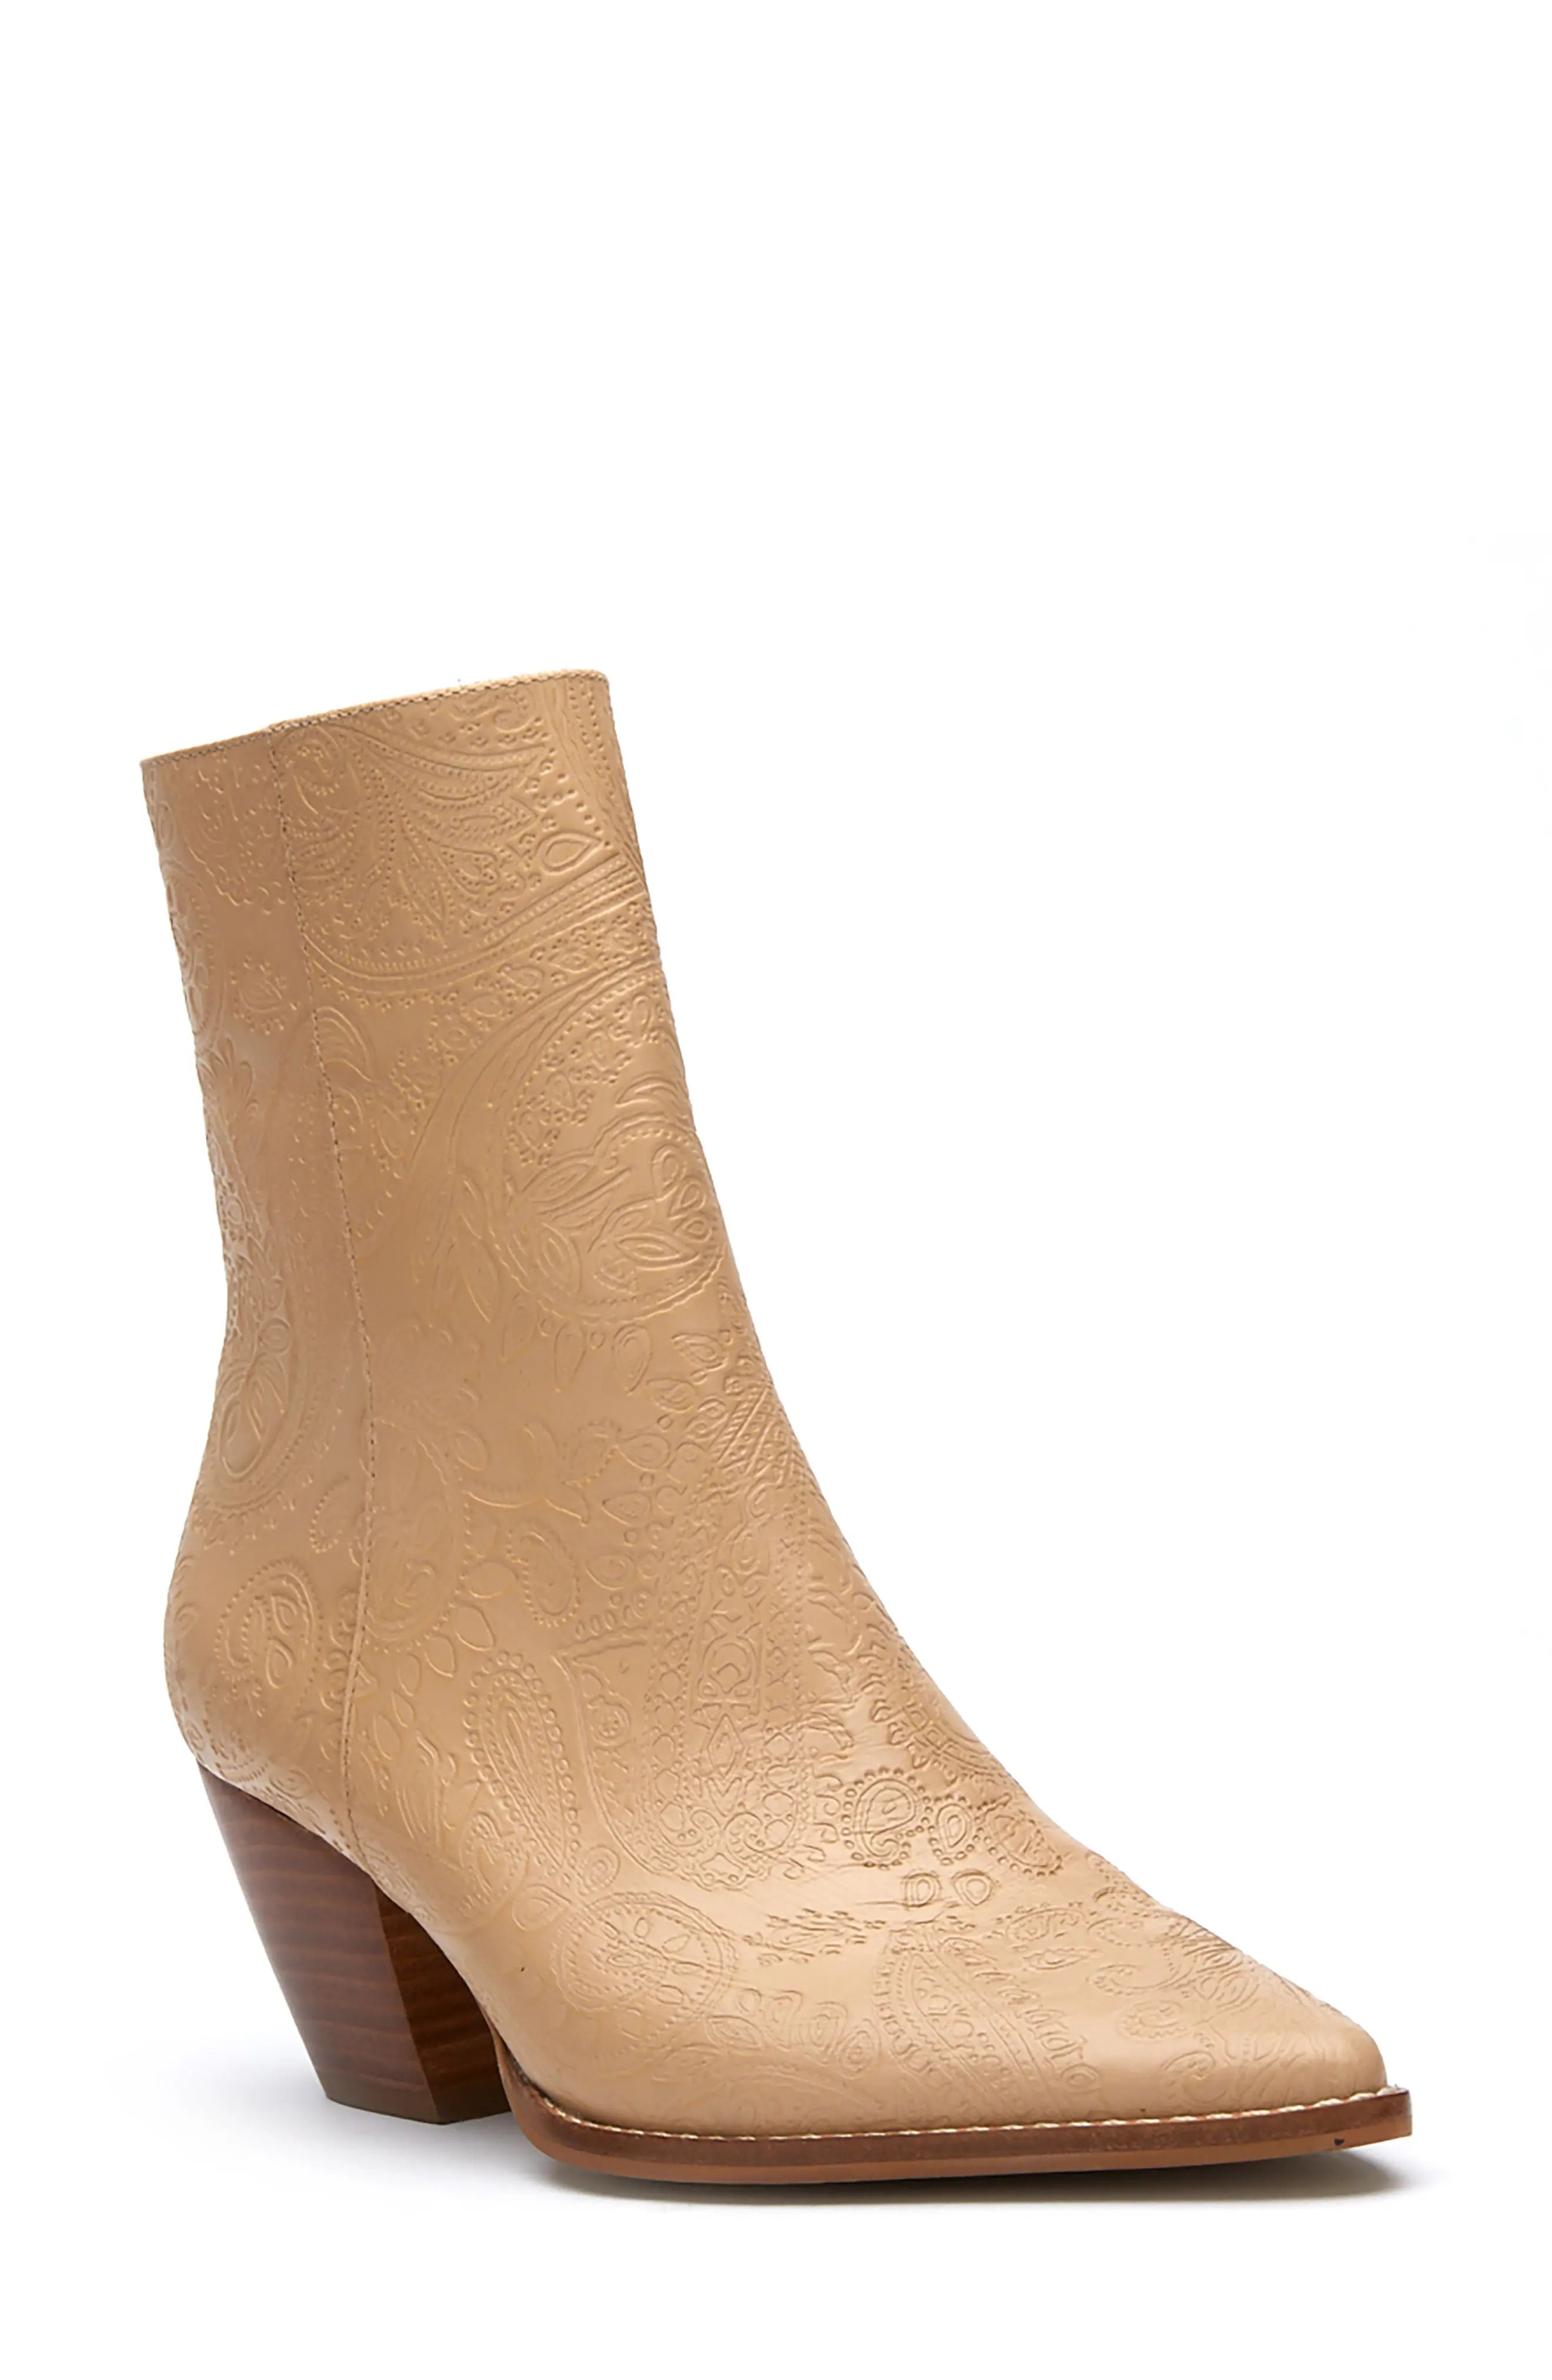 Matisse Caty Western Pointed Toe Bootie in Natural Paisley at Nordstrom, Size 9.5 | Nordstrom